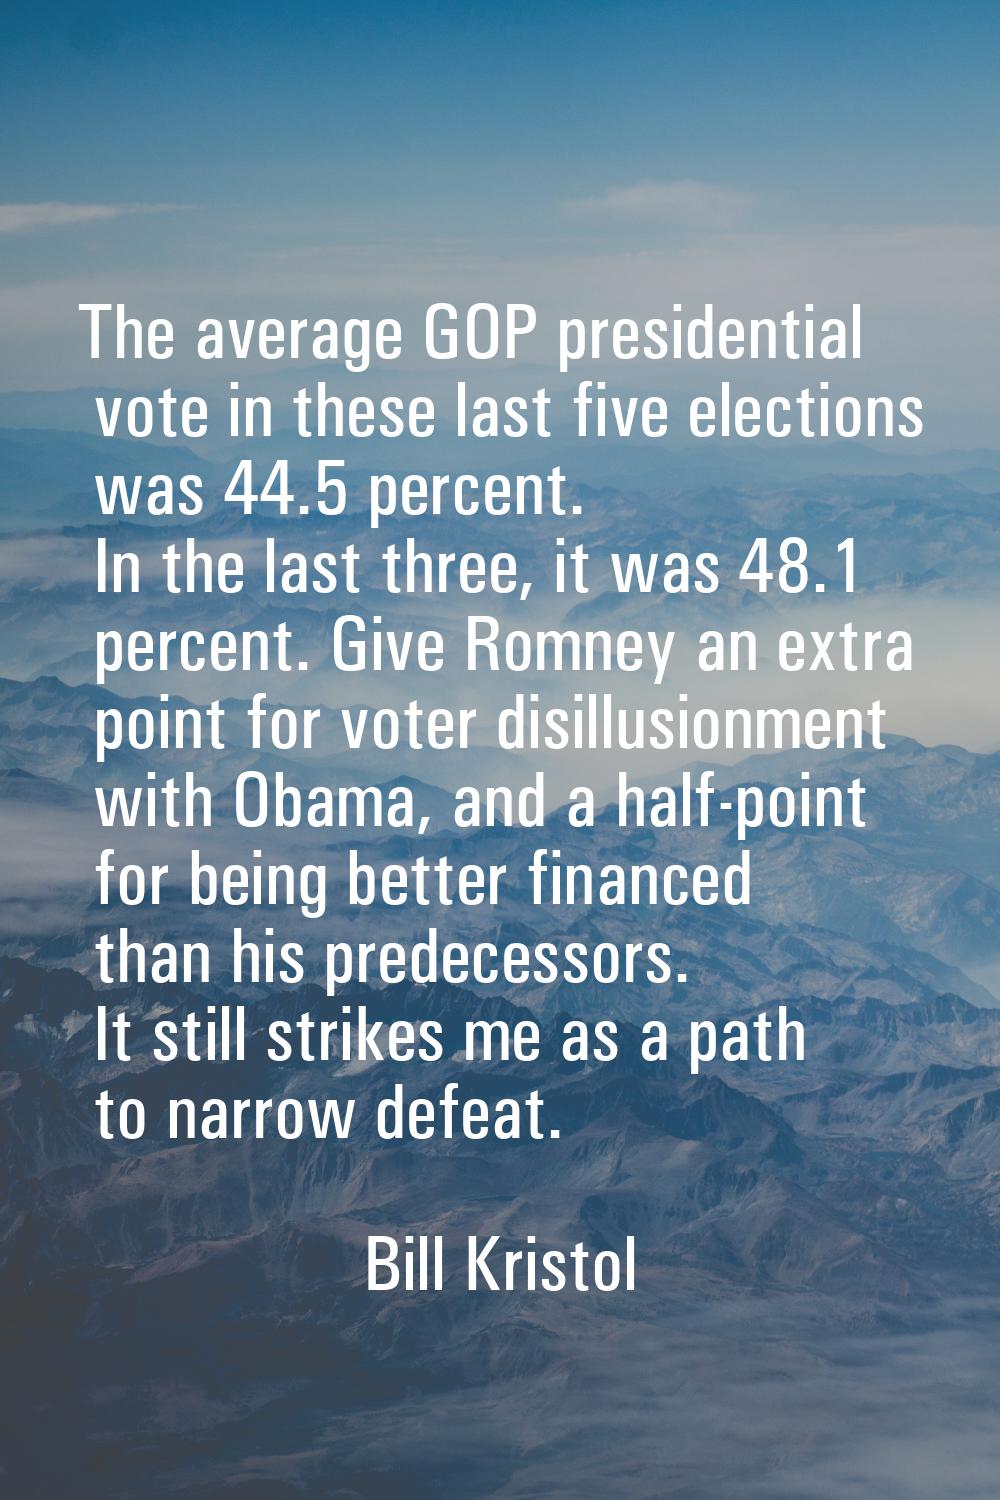 The average GOP presidential vote in these last five elections was 44.5 percent. In the last three,